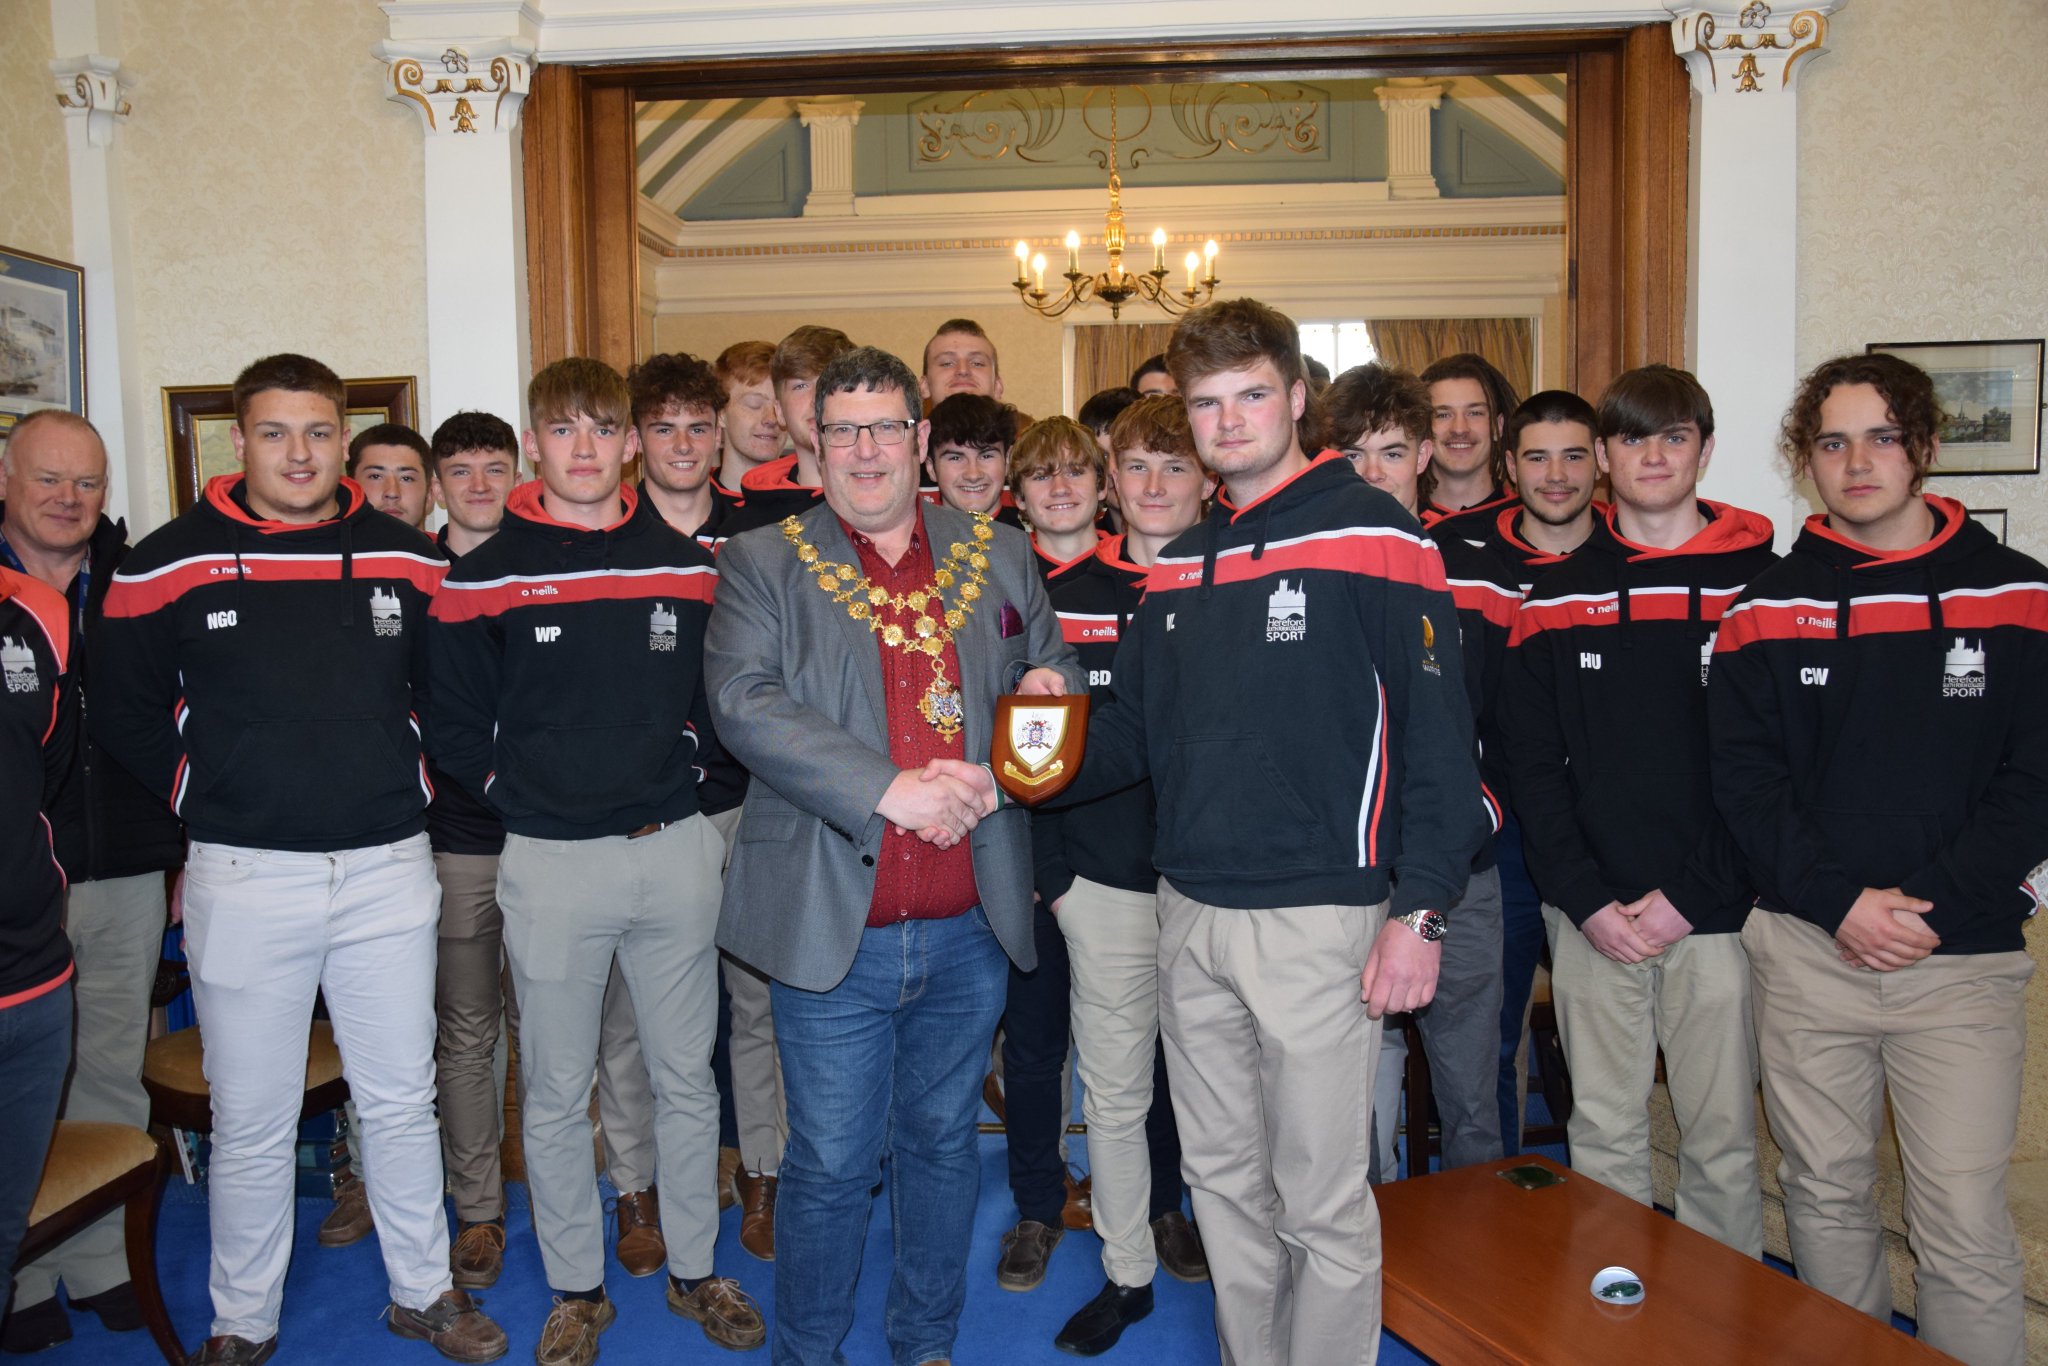 RUGBY | Hereford Sixth Form College’s winning team invited to Hereford Town Hall to celebrate their success